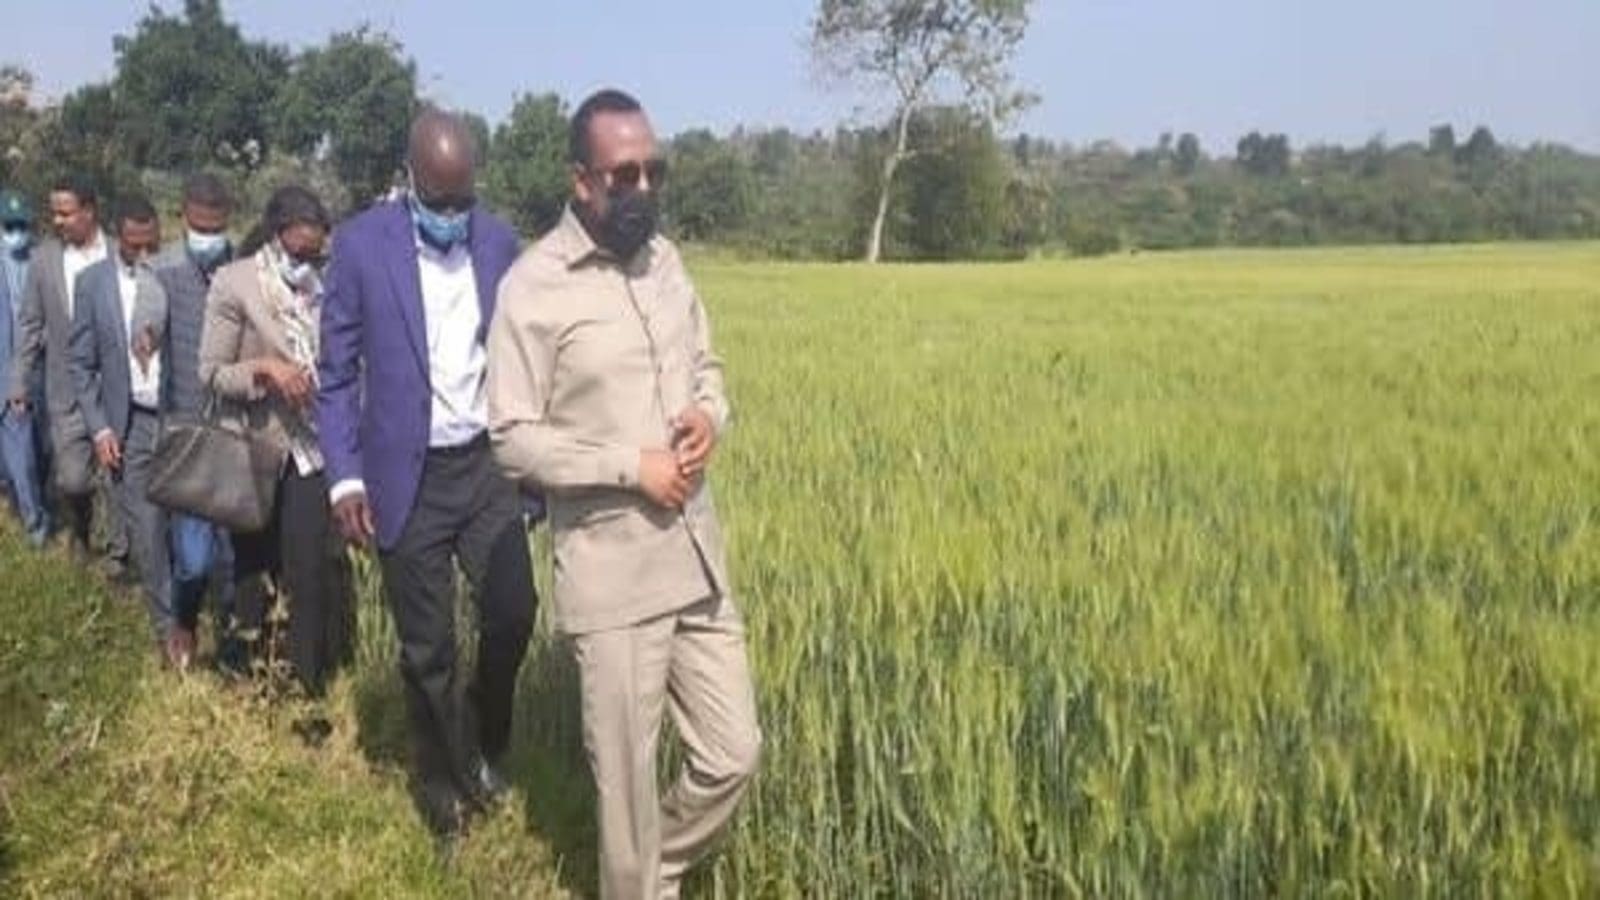 Ethiopia embarks on a program to feed neighbors after achieving wheat self-sufficiency